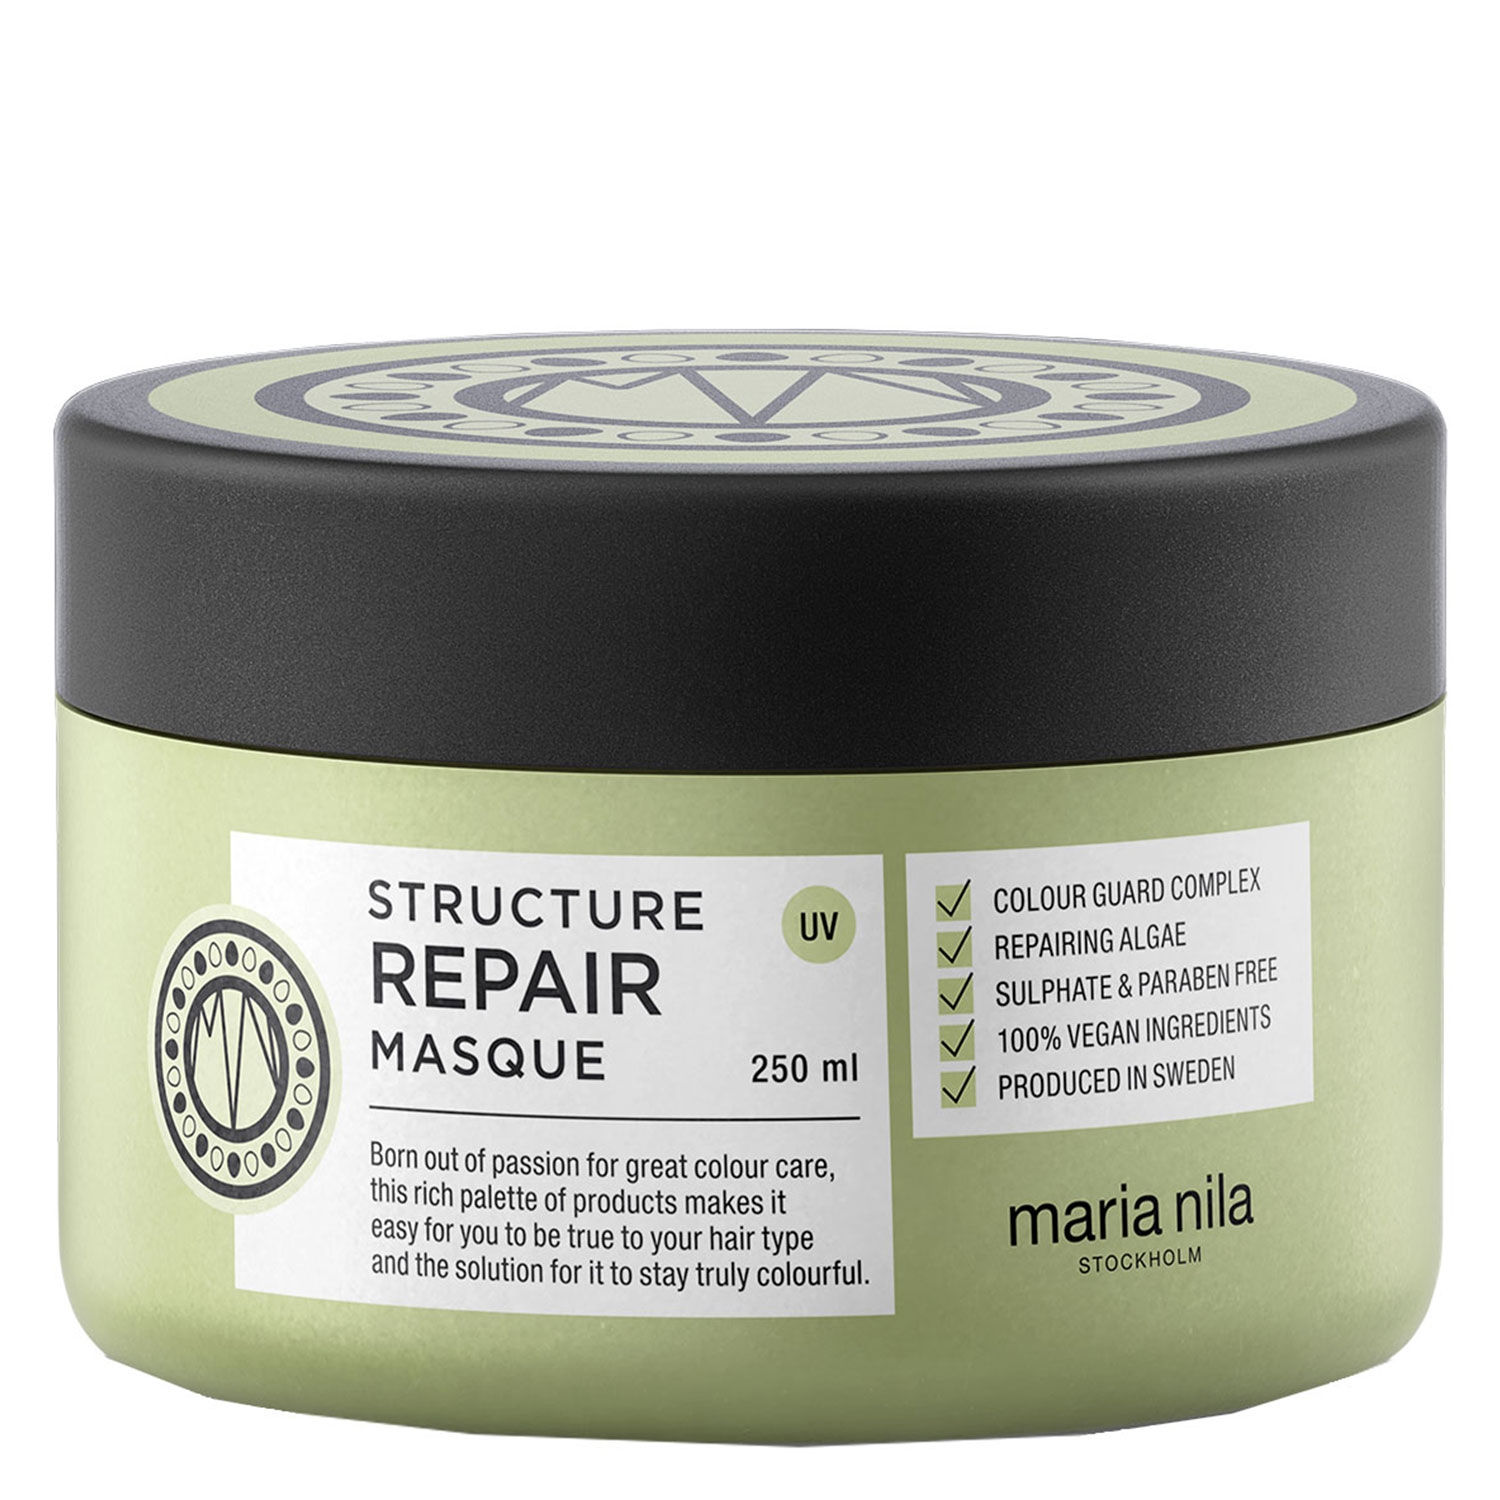 Product image from Care & Style - Structure Repair Masque